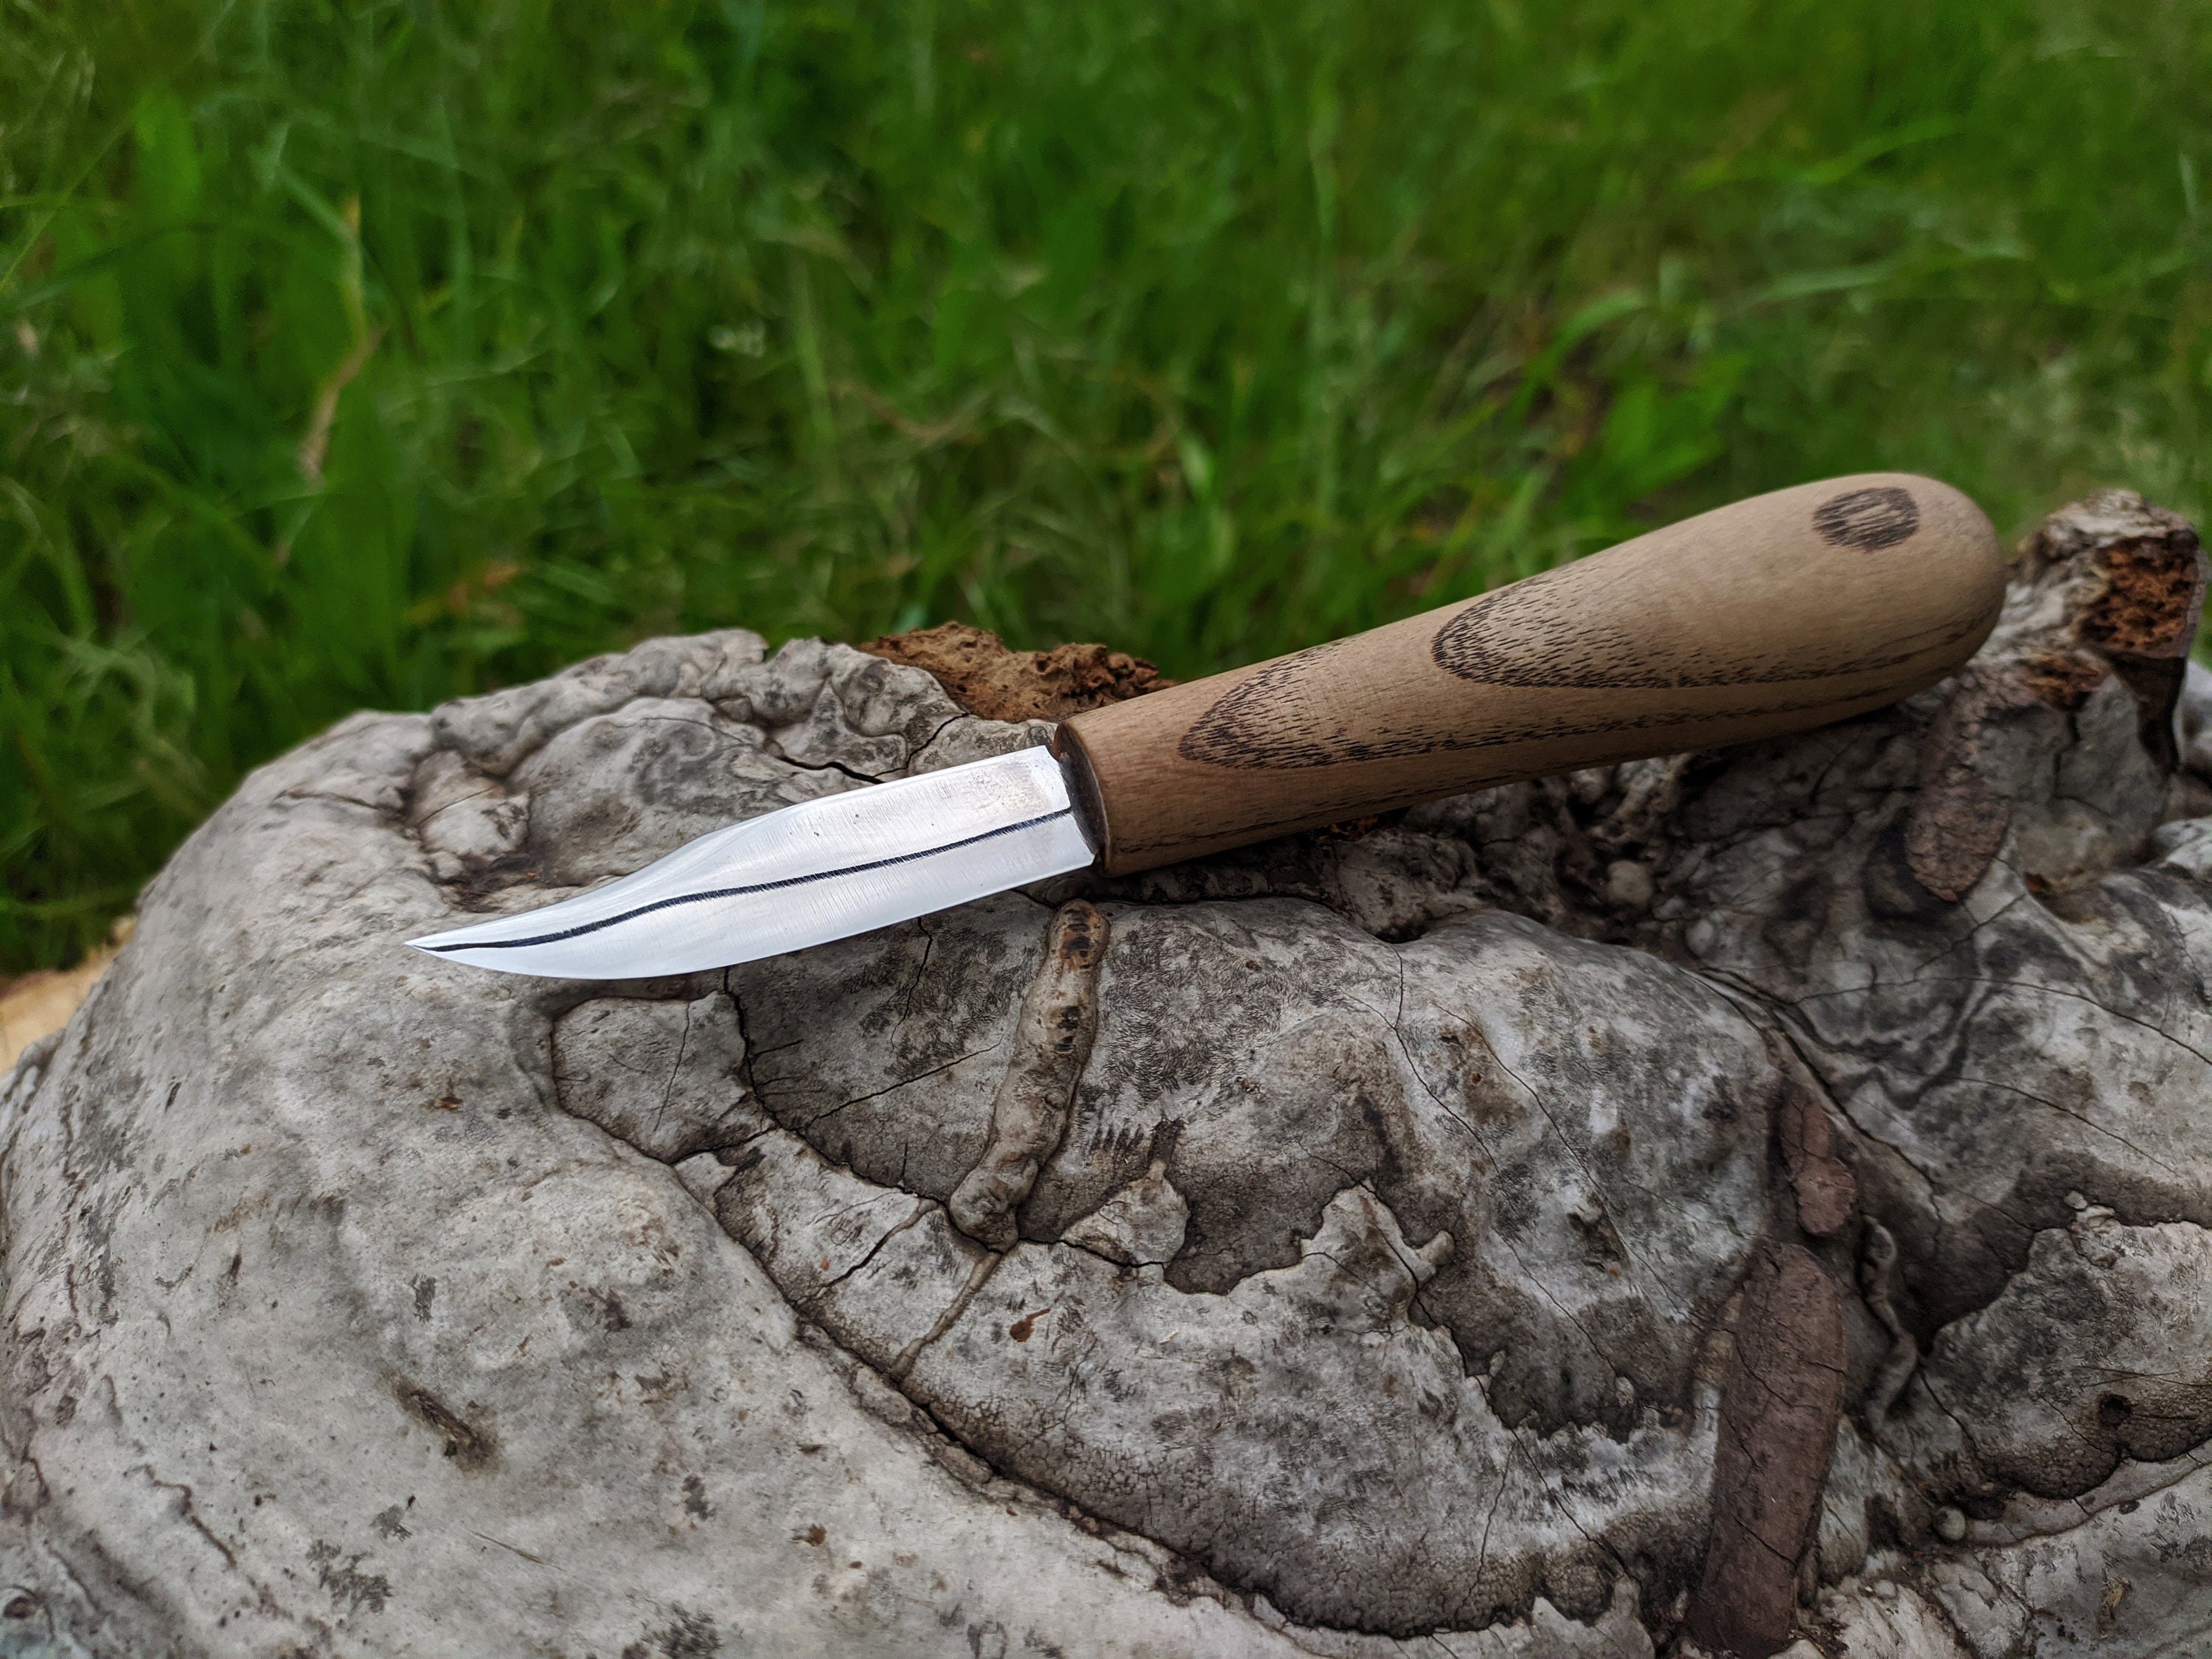 Carving Knife, Whittling Knife, Wood Carving Knife With a Leather Knife  Sheath Beavercraft C4 SH1 